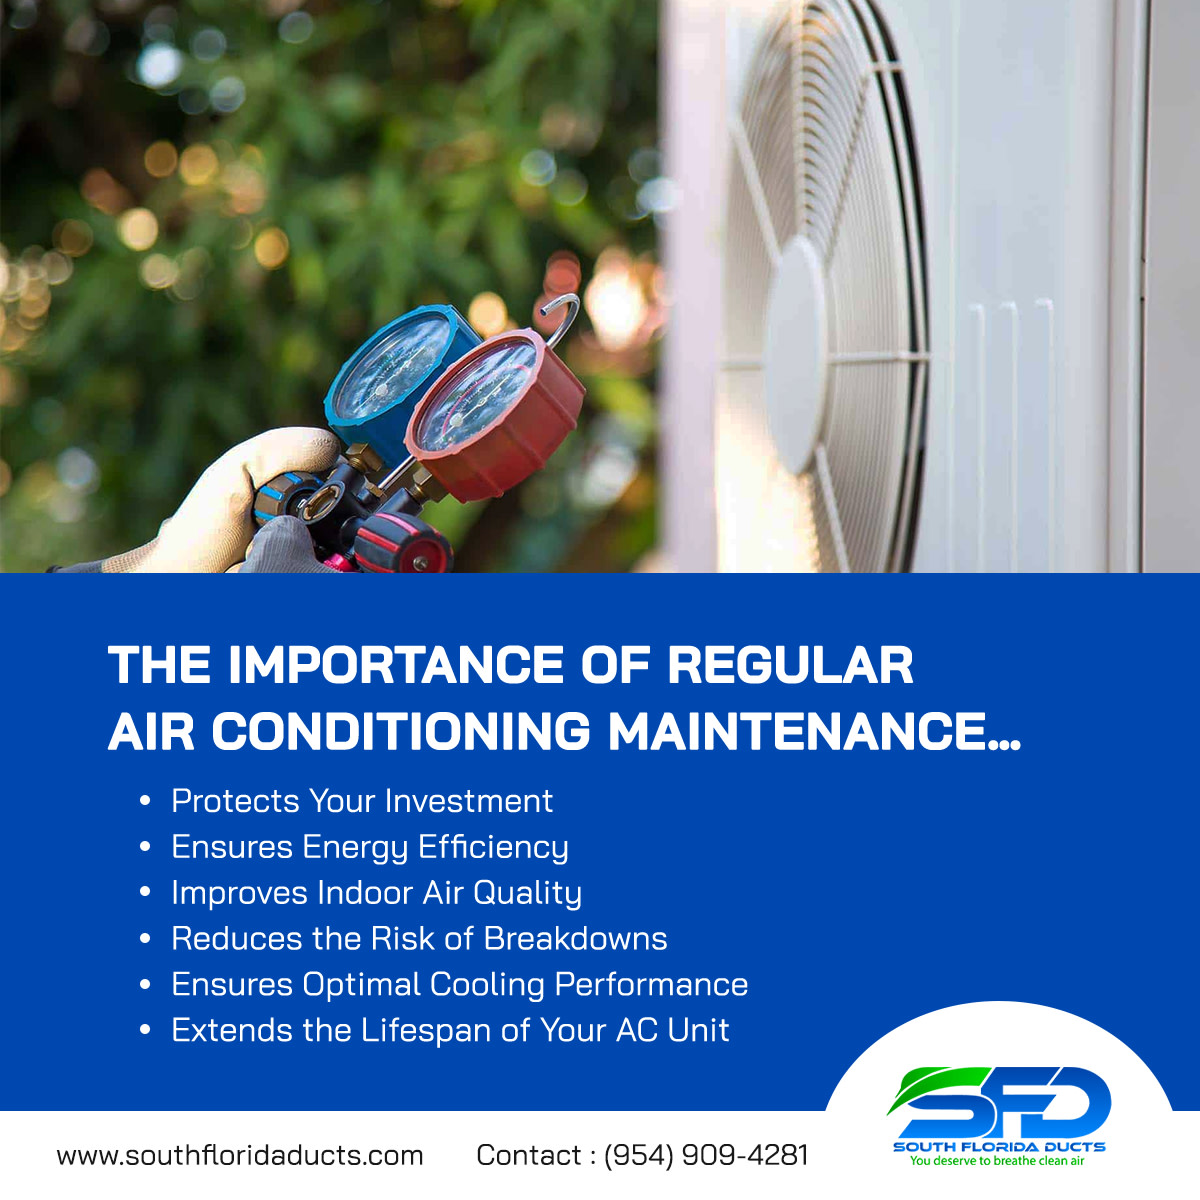 The Importance of Regular Air Conditioning Maintenance…
LEARN MORE... southfloridaducts.com/the-importance…

#airconditioning #airconditioningmaintenance #hvac #acrepair #airconditioningrepair #acreplacement #airconditioningreplacement #acfilters #airconditioningfilters #fortlauderdale